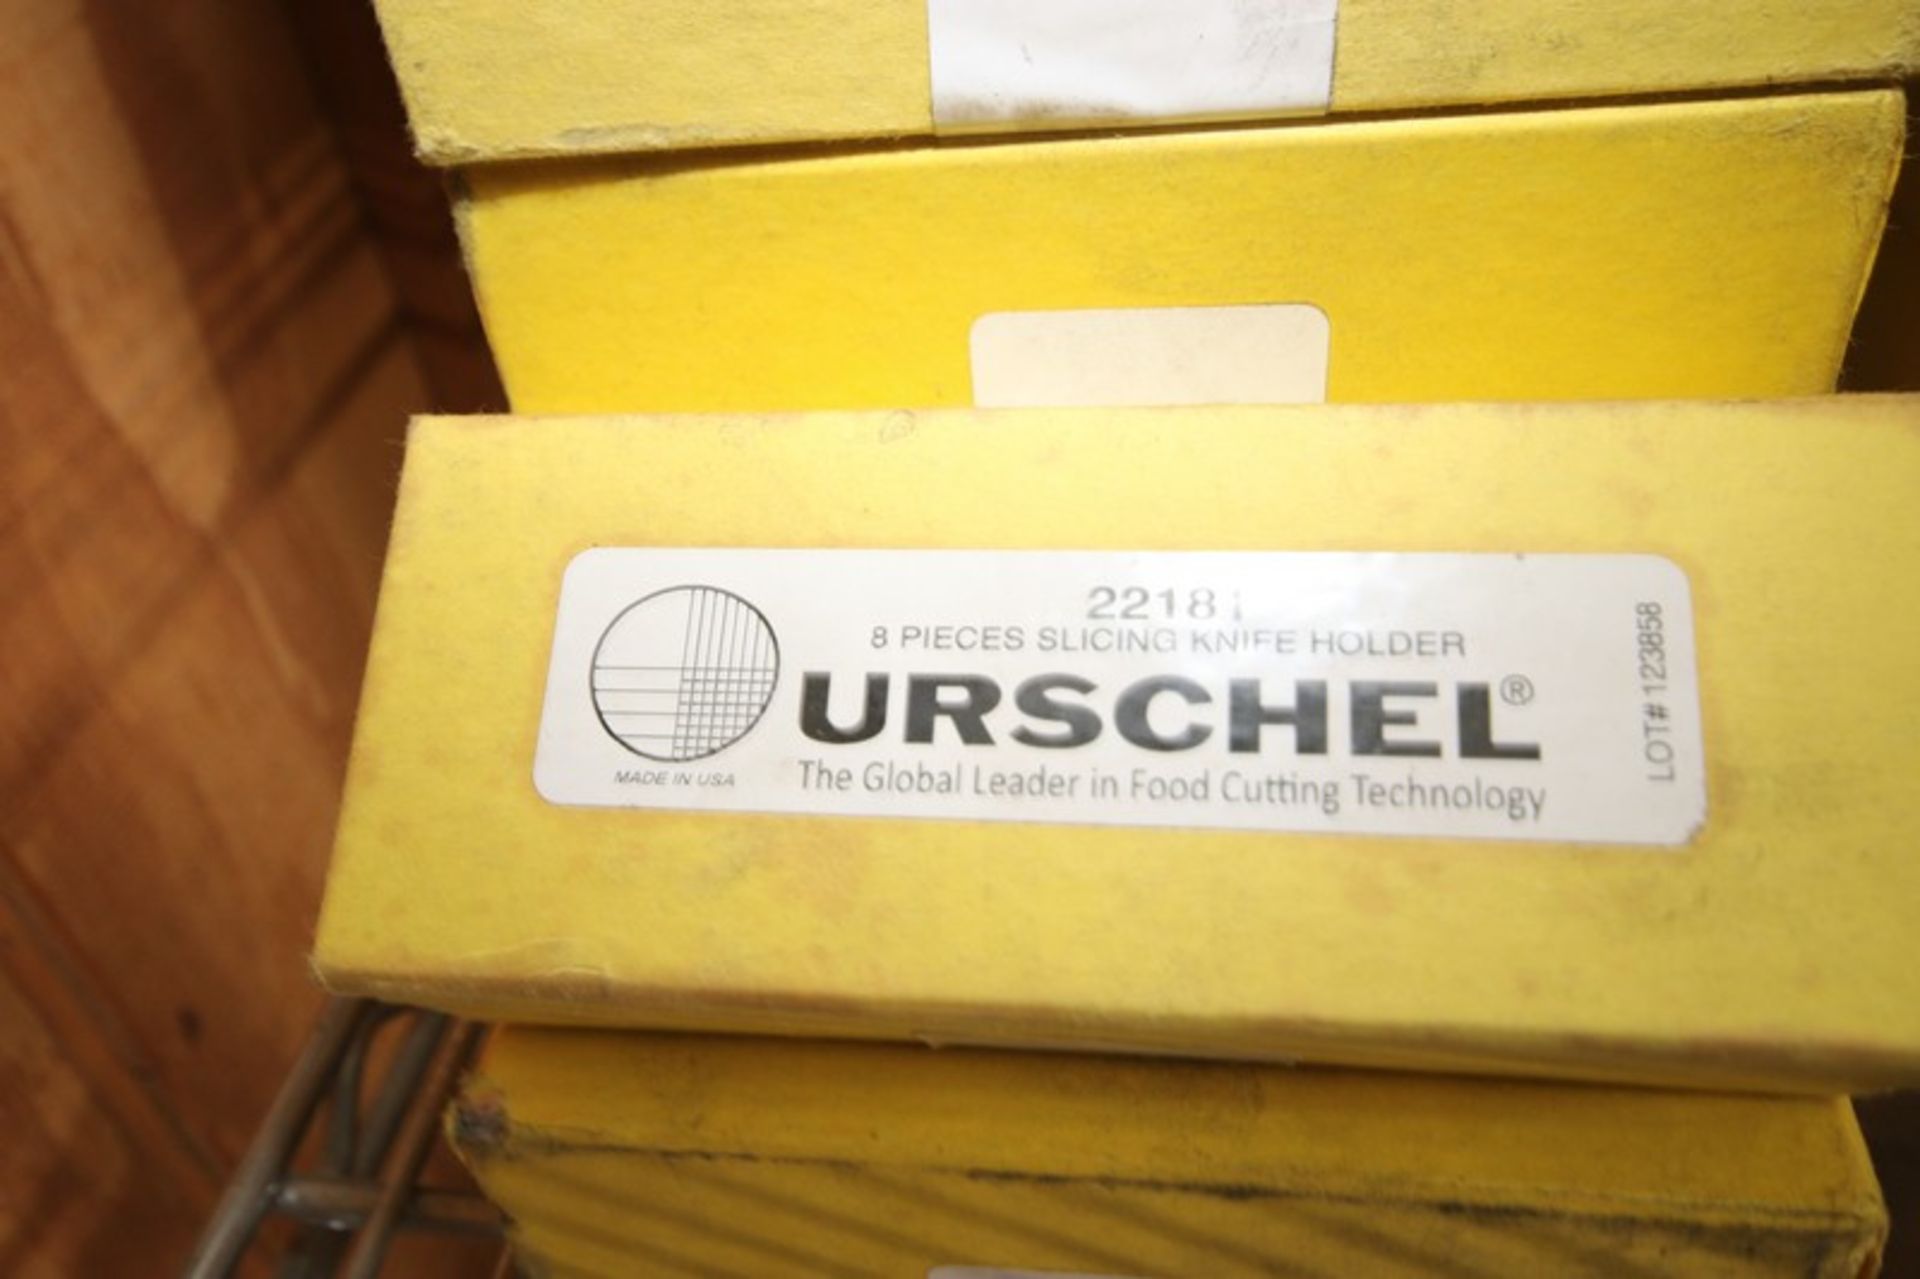 (23) BOXES OF URSCHEL SLICING KNIFE HOLDER,PART NO. 22181, EACH BOX (8) PIECES (INV#80375)(Located @ - Image 3 of 3